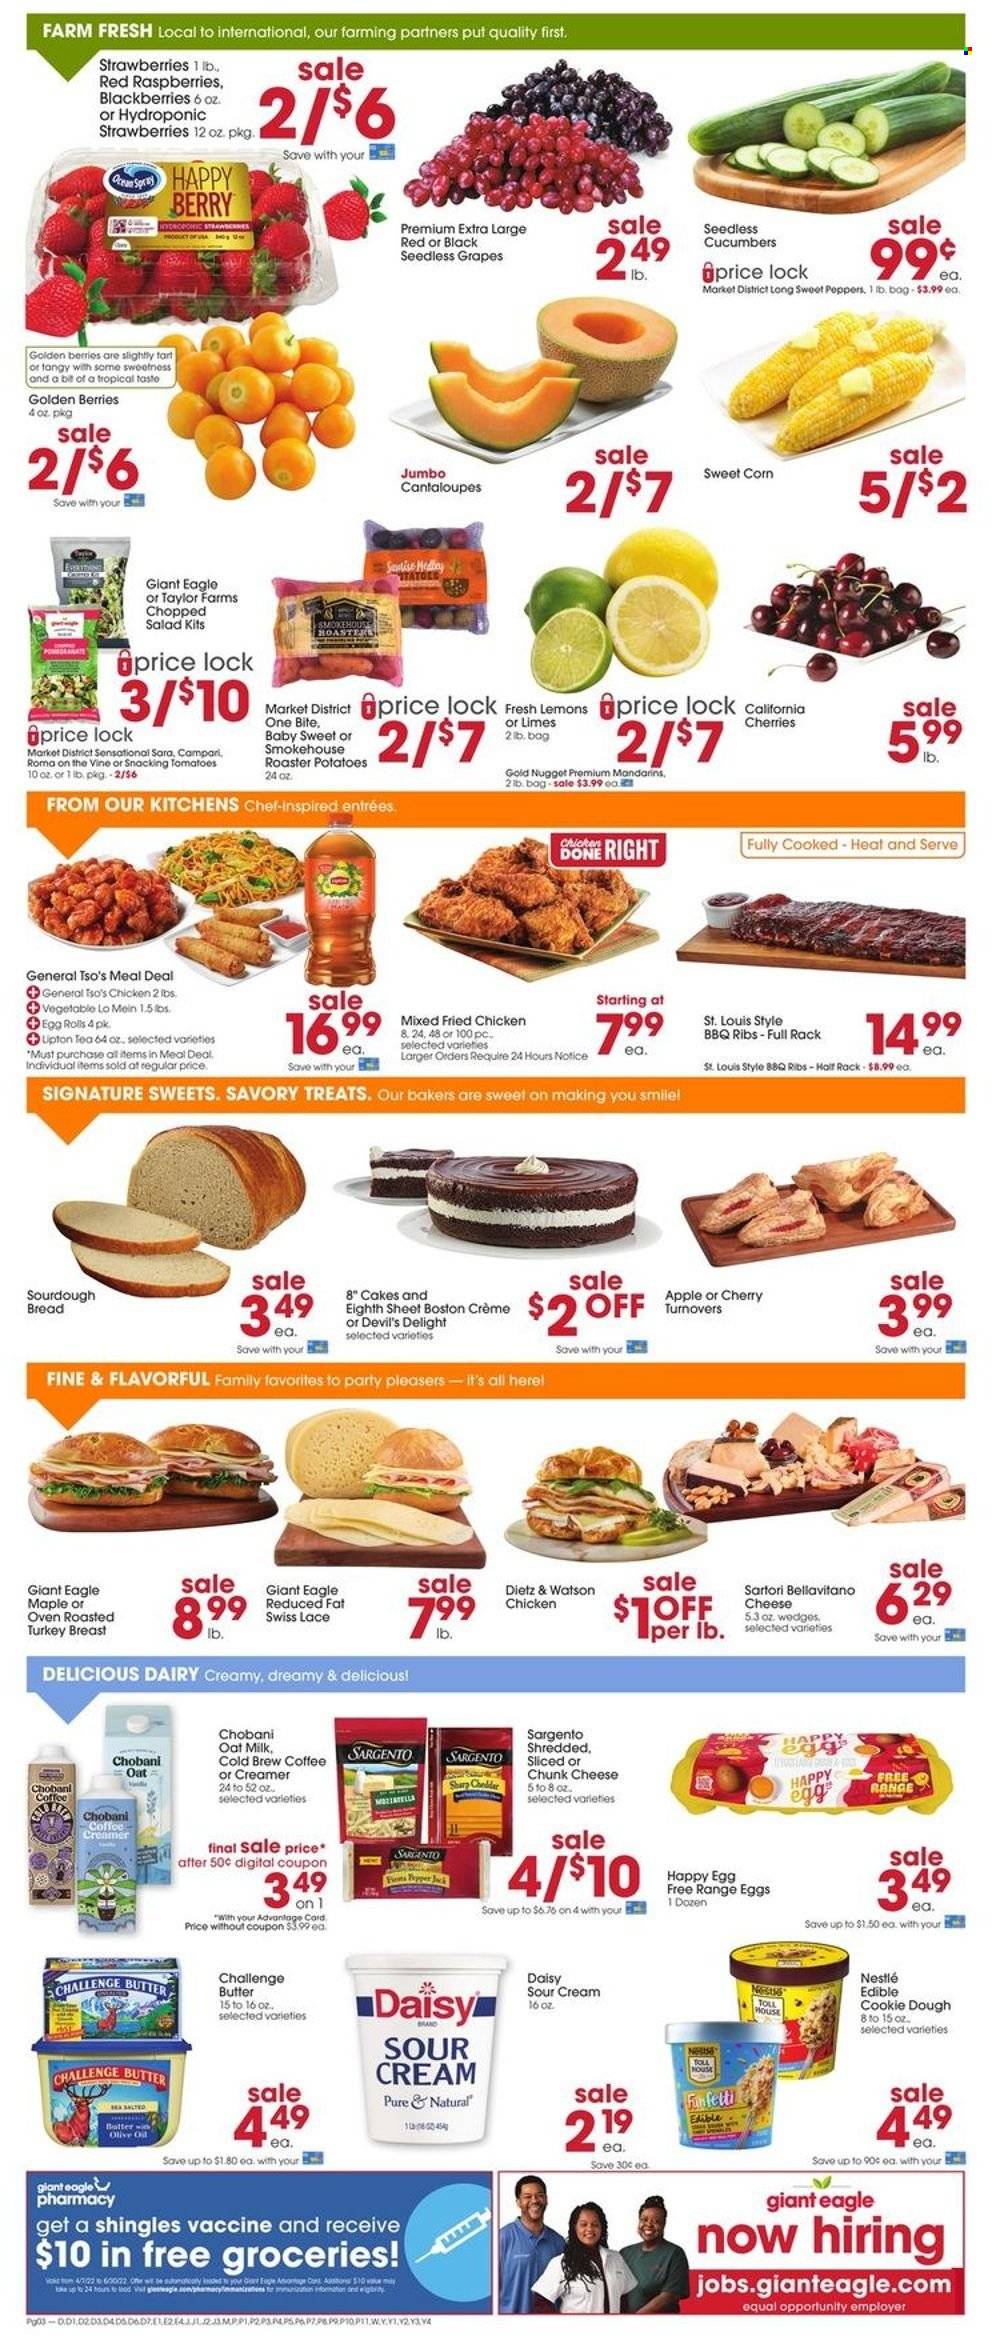 thumbnail - Giant Eagle Flyer - 05/19/2022 - 05/25/2022 - Sales products - bread, cake, tart, sourdough bread, turnovers, cantaloupe, corn, cucumber, tomatoes, potatoes, salad, sweet corn, chopped salad, grapes, limes, mandarines, seedless grapes, strawberries, egg rolls, fried chicken, Dietz & Watson, cheese, chunk cheese, Sargento, BellaVitano, Chobani, milk, oat milk, butter, sour cream, creamer, cookie dough, Nestlé, olive oil, oil, tea, Sharp, Bakers, lemons. Page 2.